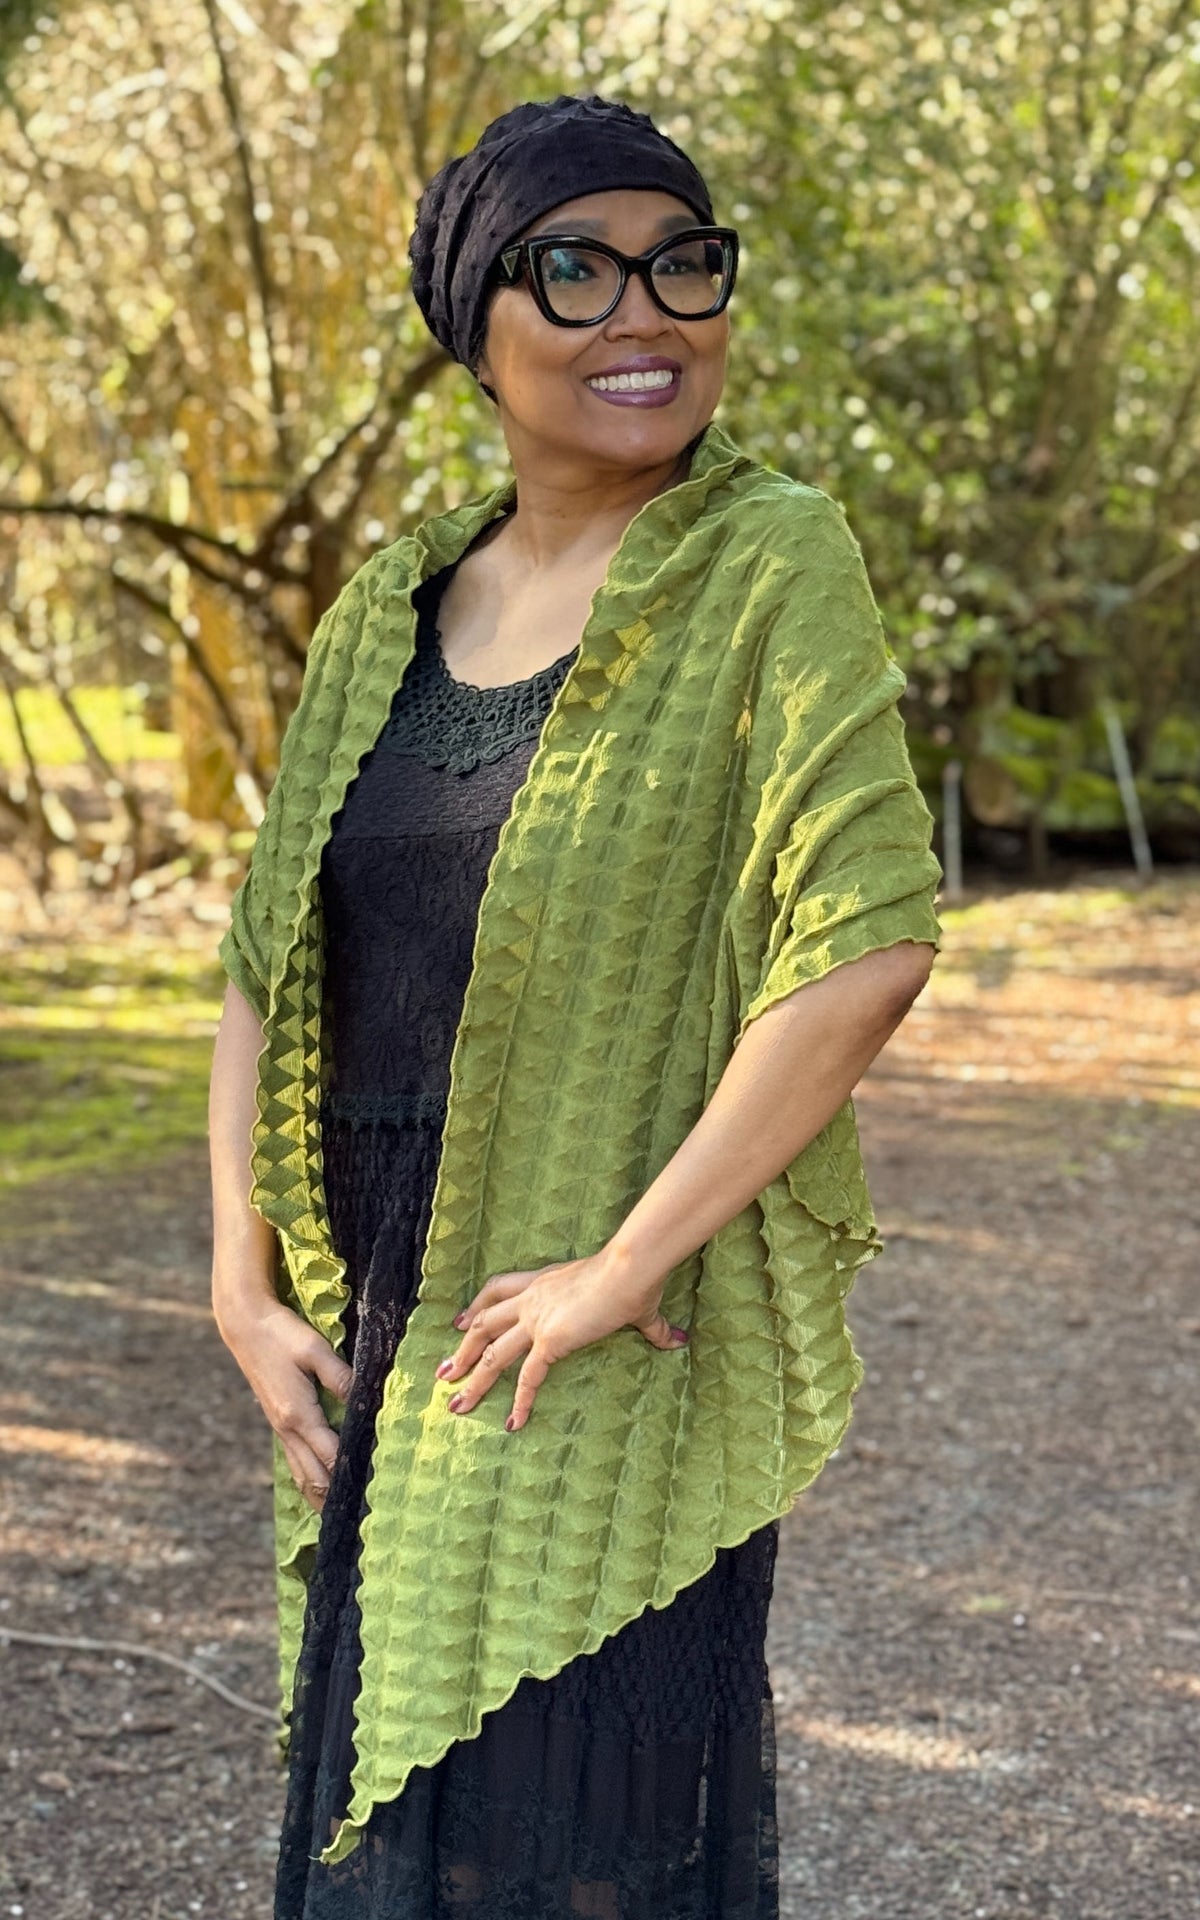 Model in Handkerchief Scarf in Avocado and Rowdie in Fractal Burnt Black from the Pandemonium Seattle Fractal Collection. LYC by Pandemonium is handmade in Seattle, WA, USA.